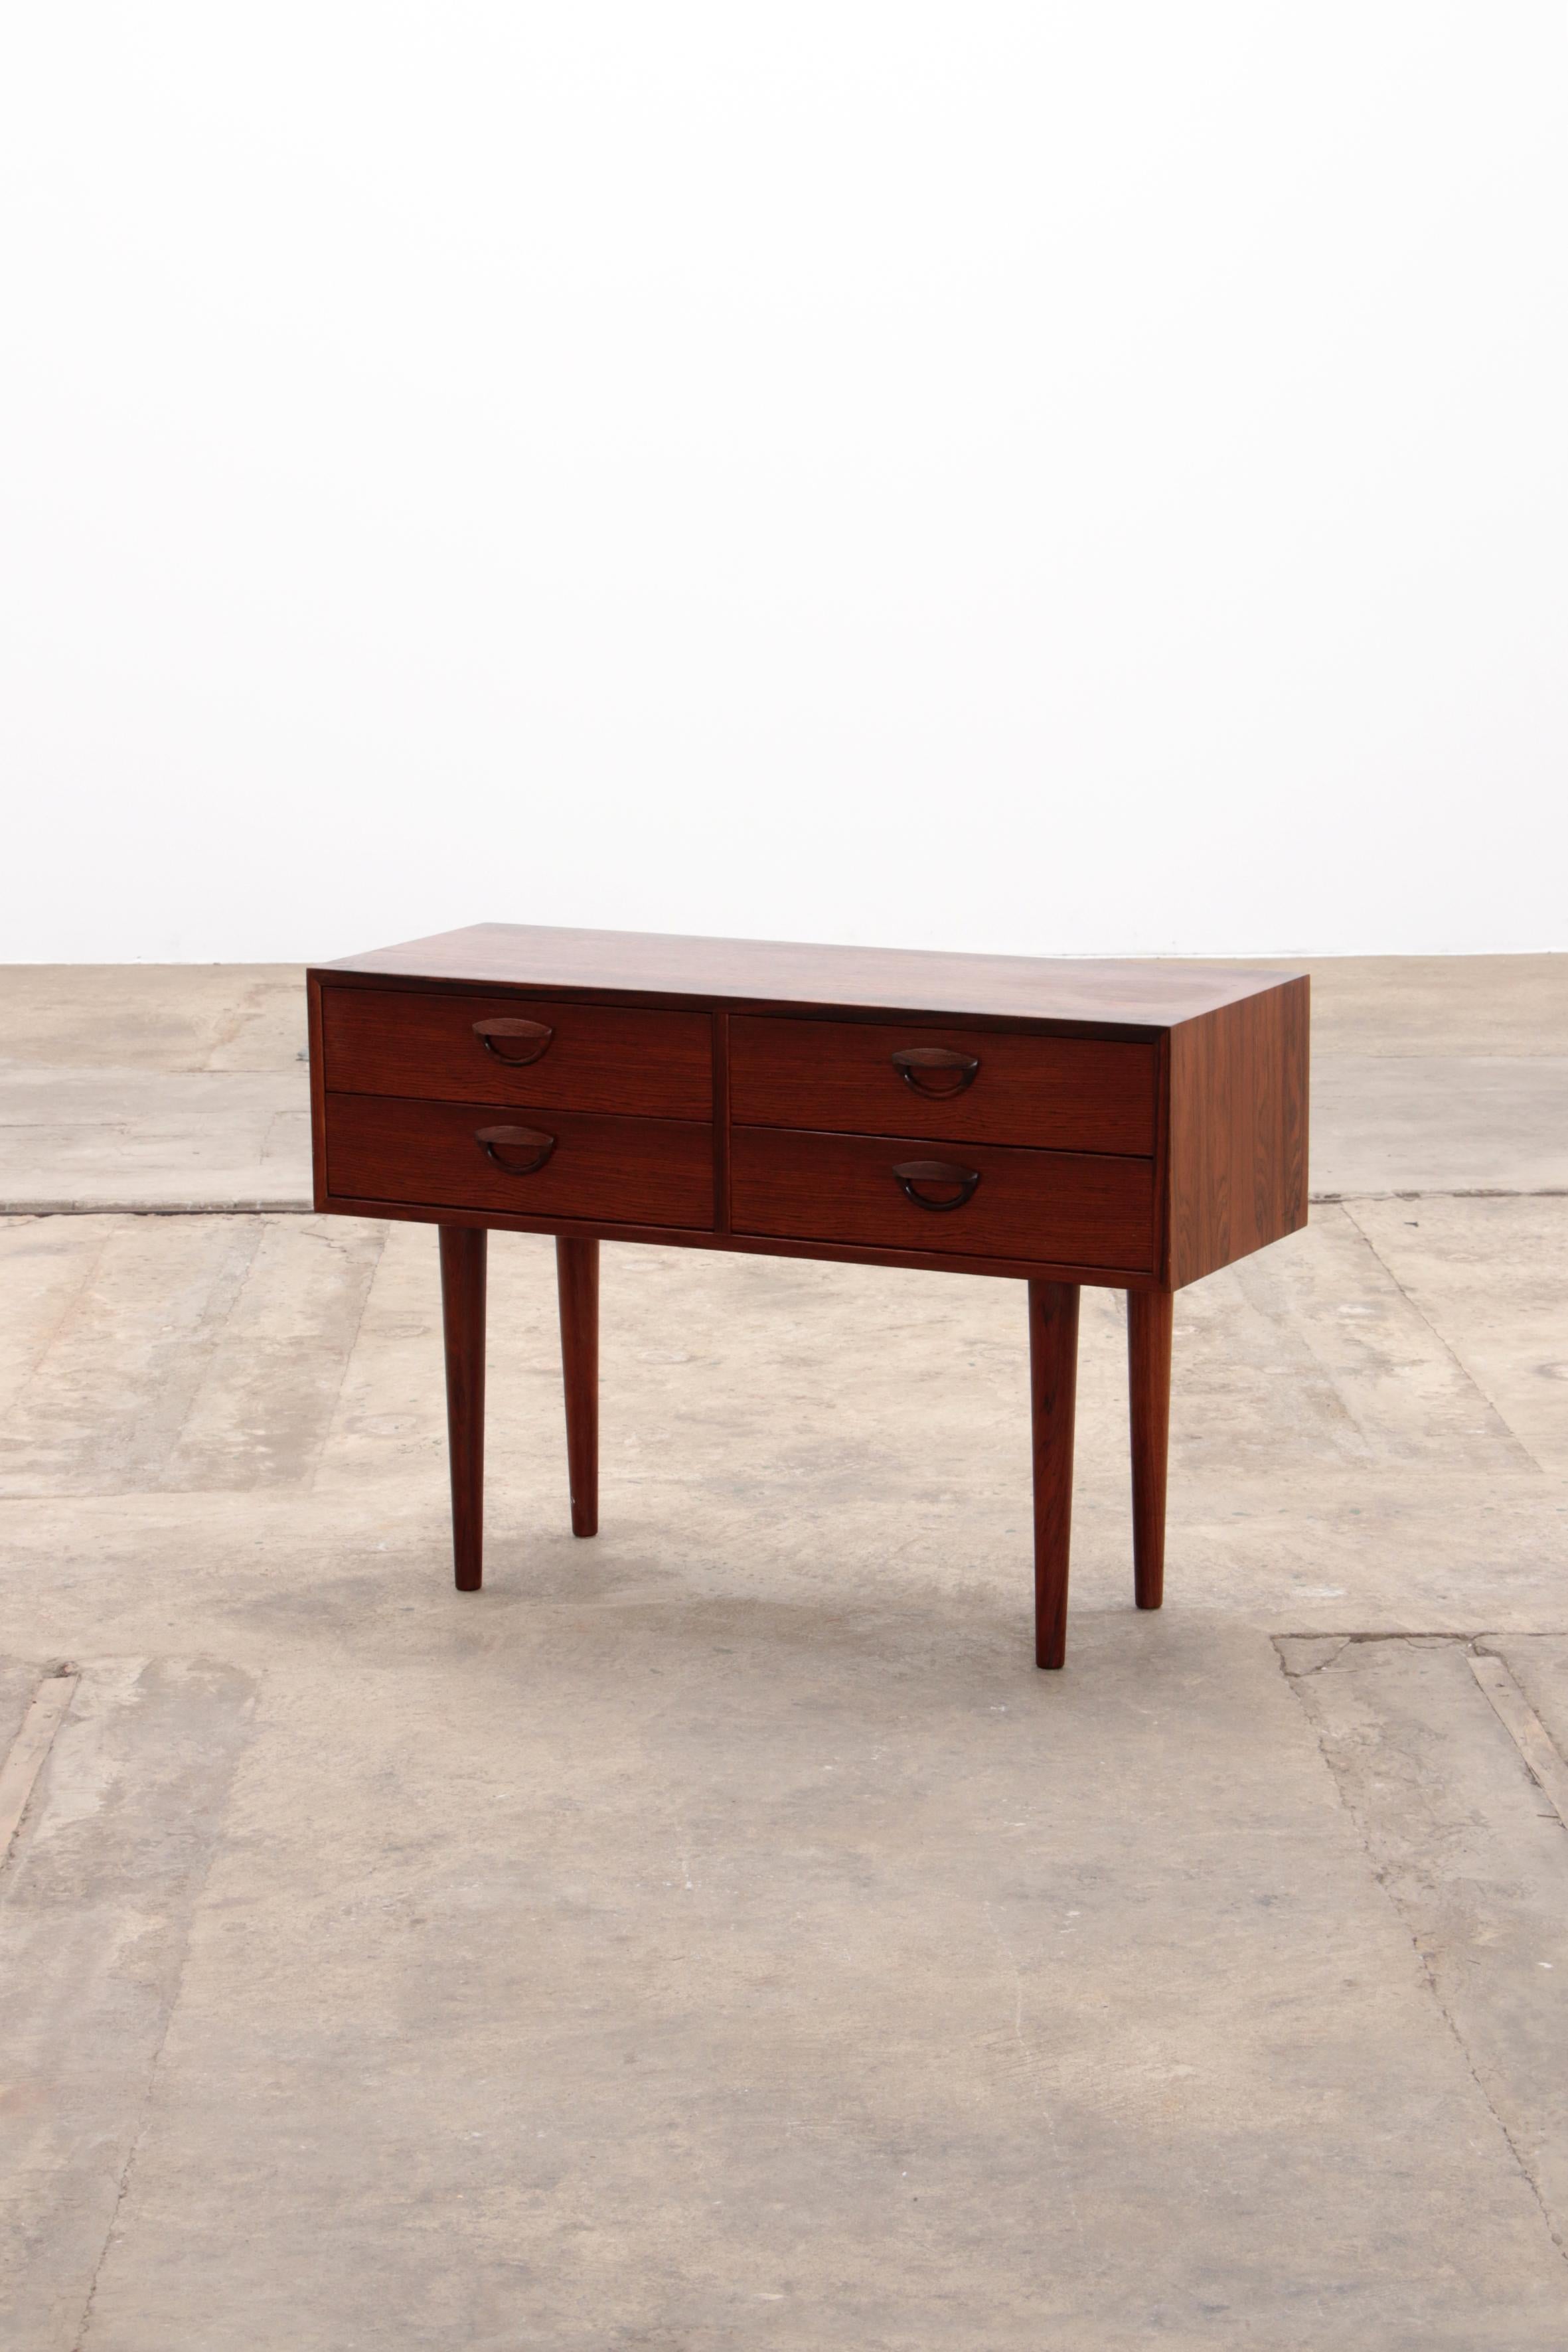 Danish Sideboard by Kai Kristiansen for FM Møbler, 1960s


Special chest of drawers designed by the Dane Kai Kristiansen for the Feldballe Møbelfabrik.

Vintage cabinet made of teak wood with 4 drawers.

The vintage chest of drawers is designed in